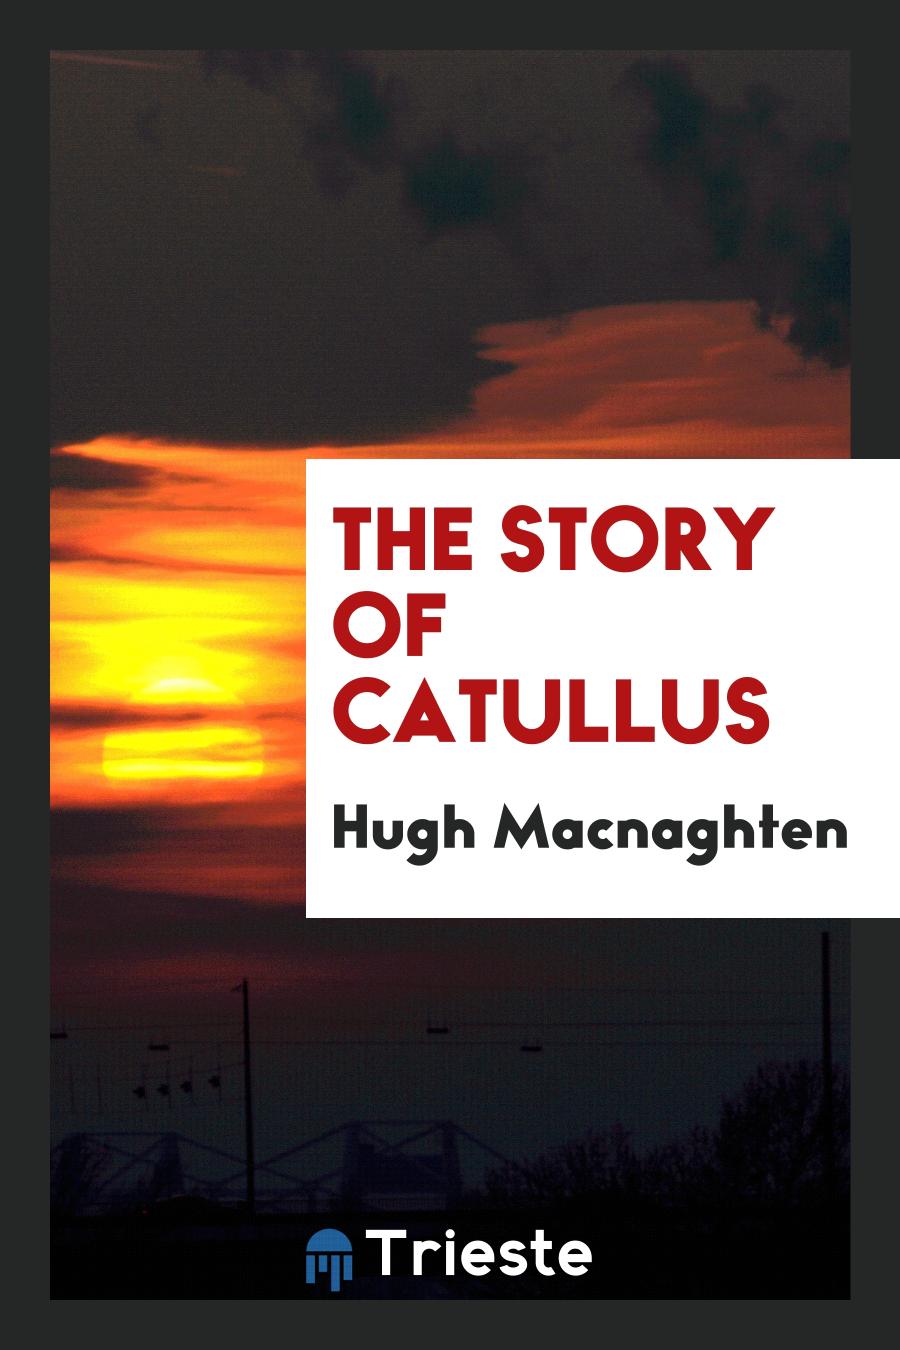 The Story of Catullus